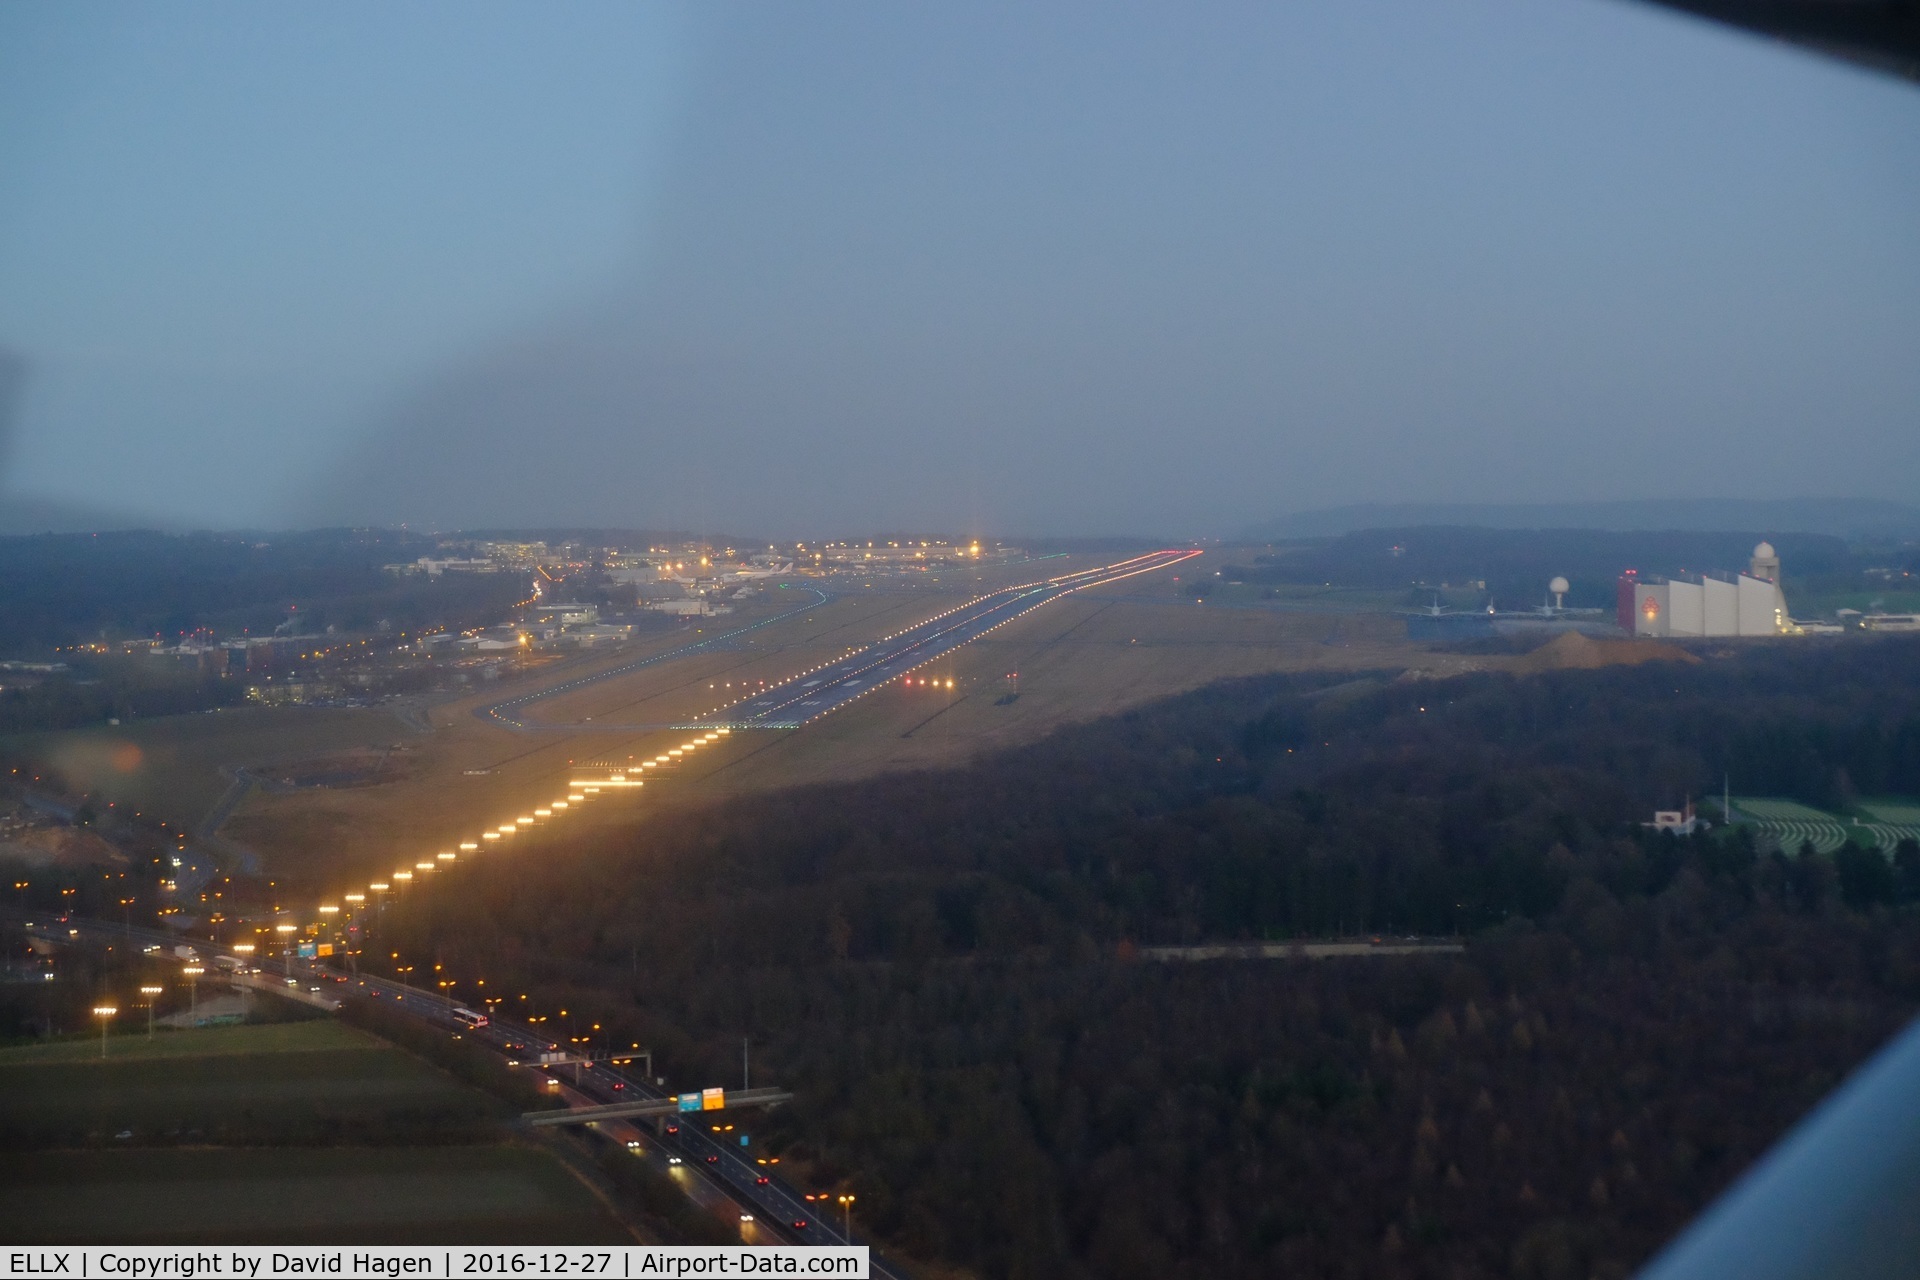 Luxembourg International Airport, Luxembourg Luxembourg (ELLX) - Turning final for runway 06 in Luxembourg at 17:00 LT after sunset in December.